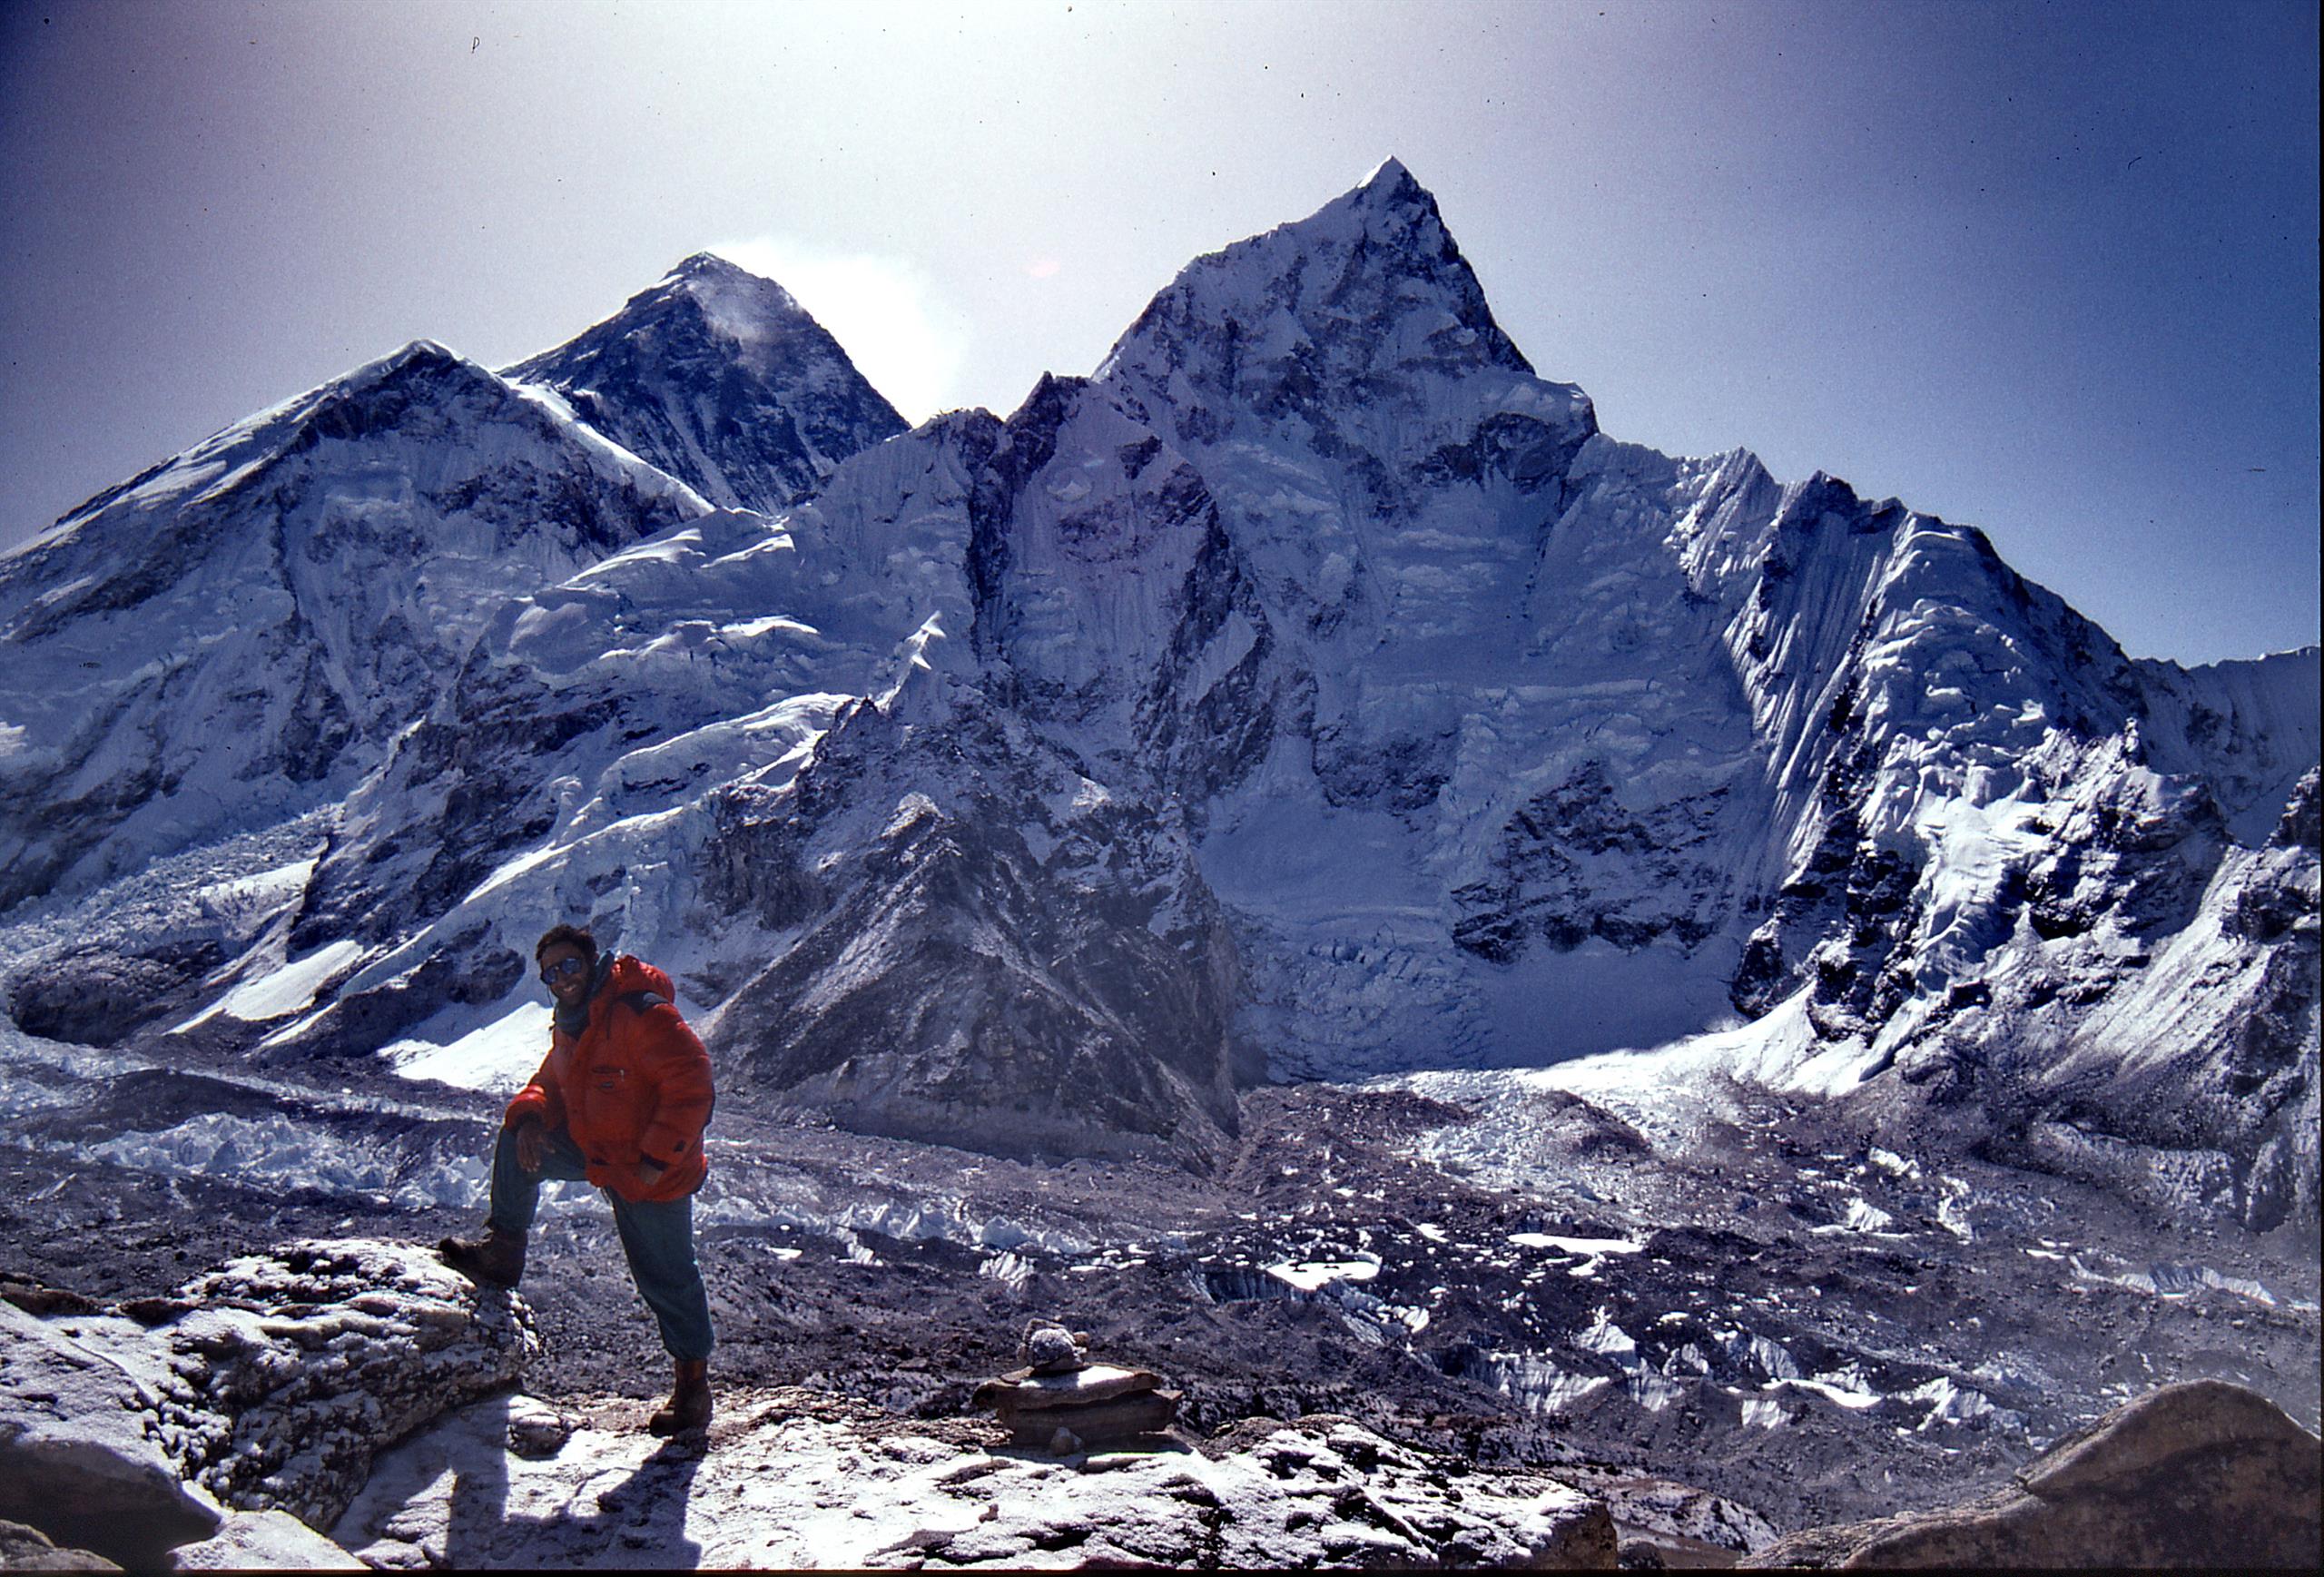 Viktor on top of Kala Patthar (altitude 18,593 Feet/5,550 Meters) in the Nepal Himalayas, with Mount Everest on the back.